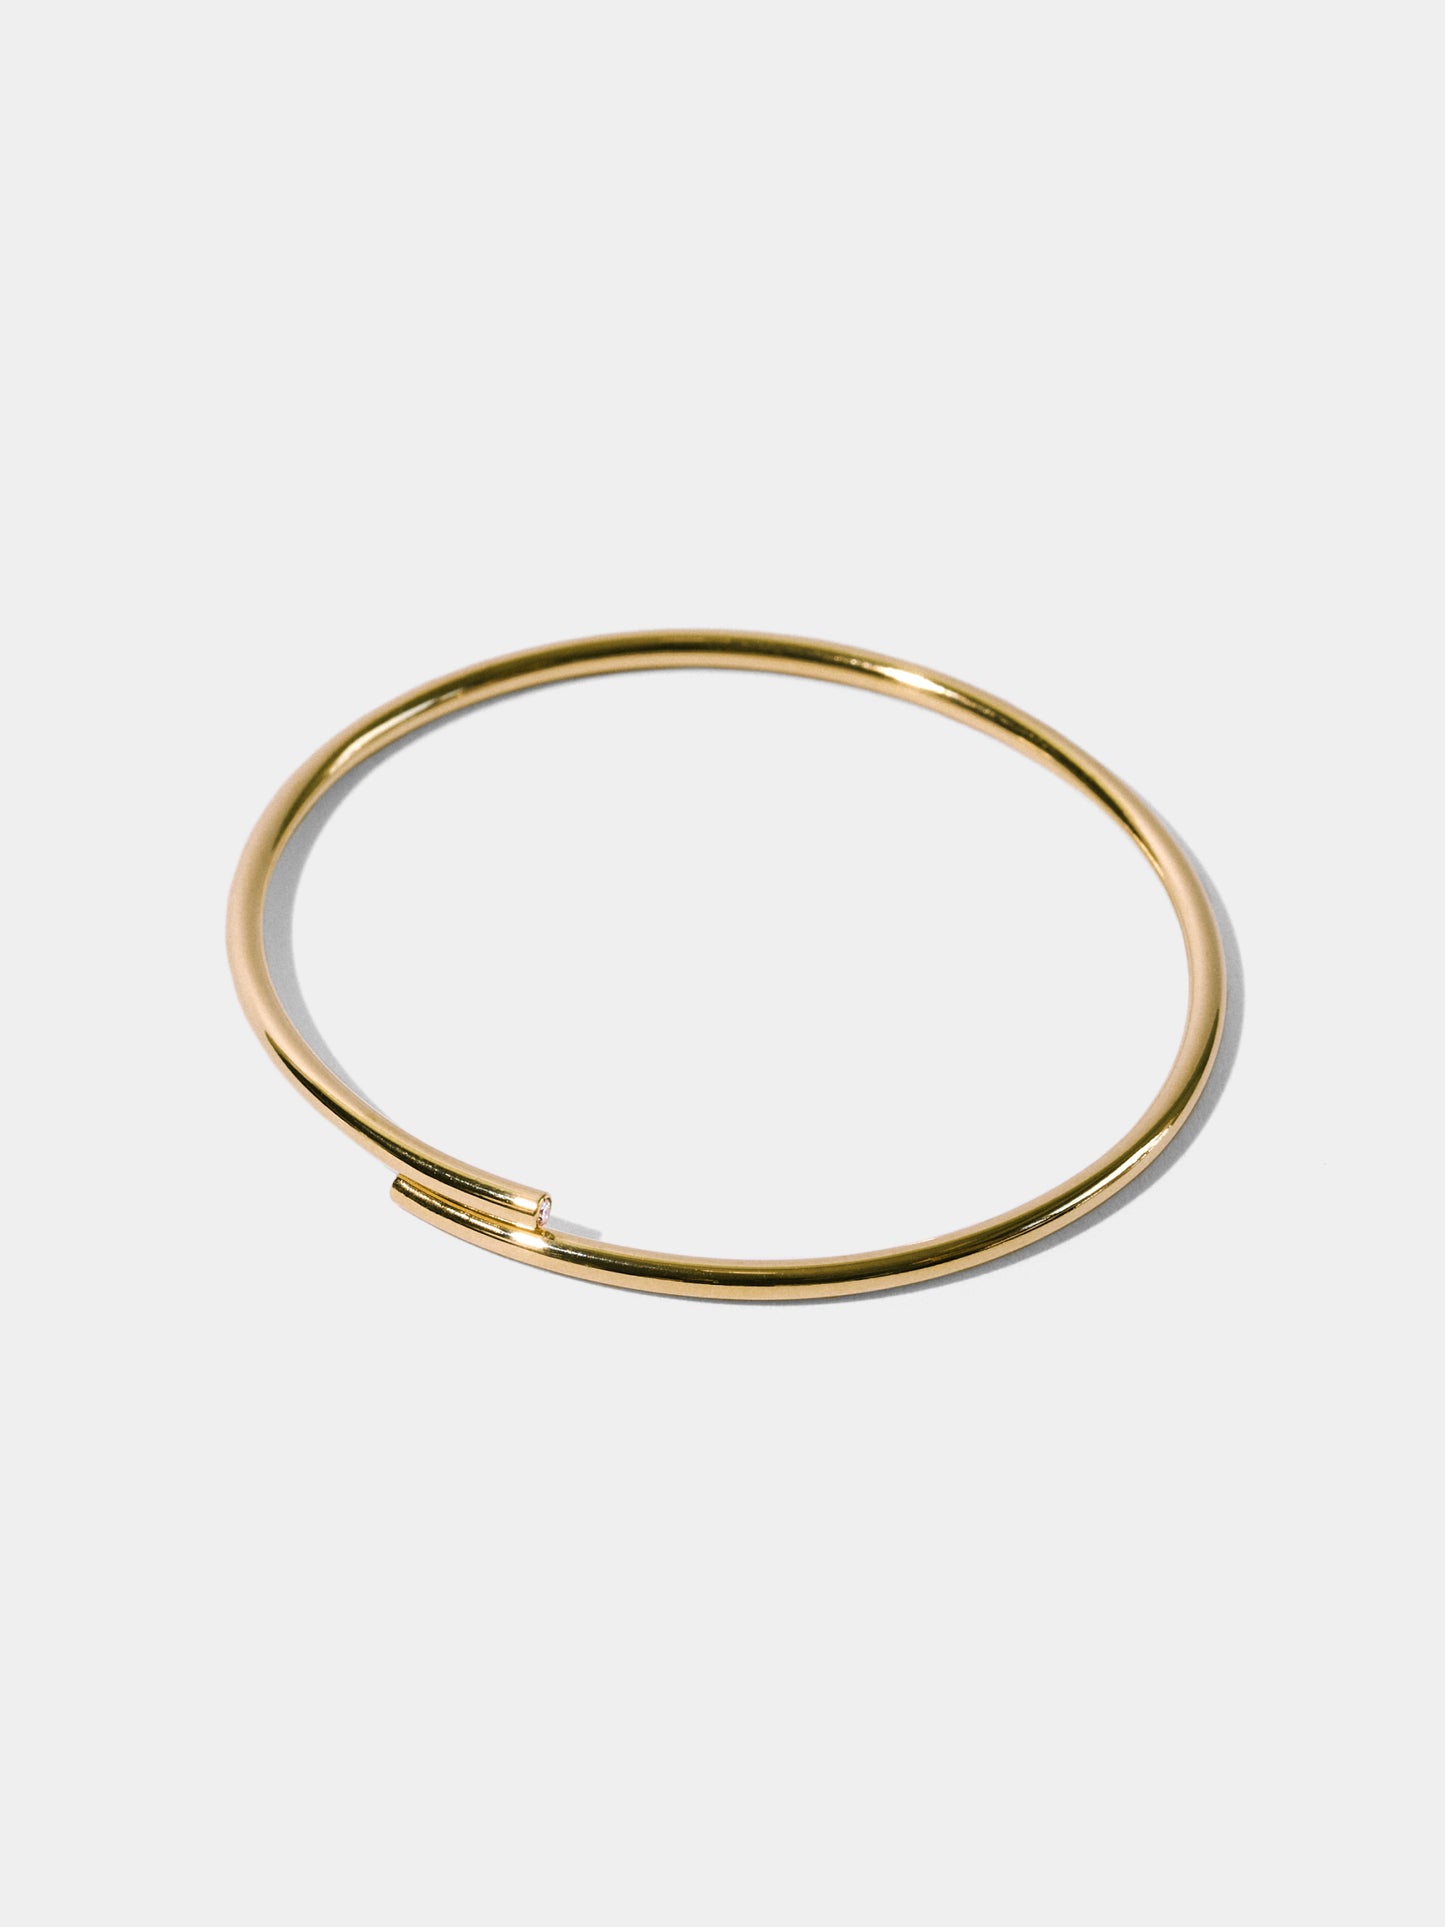 CROSSING_Bangle_Round_2.2MM_S